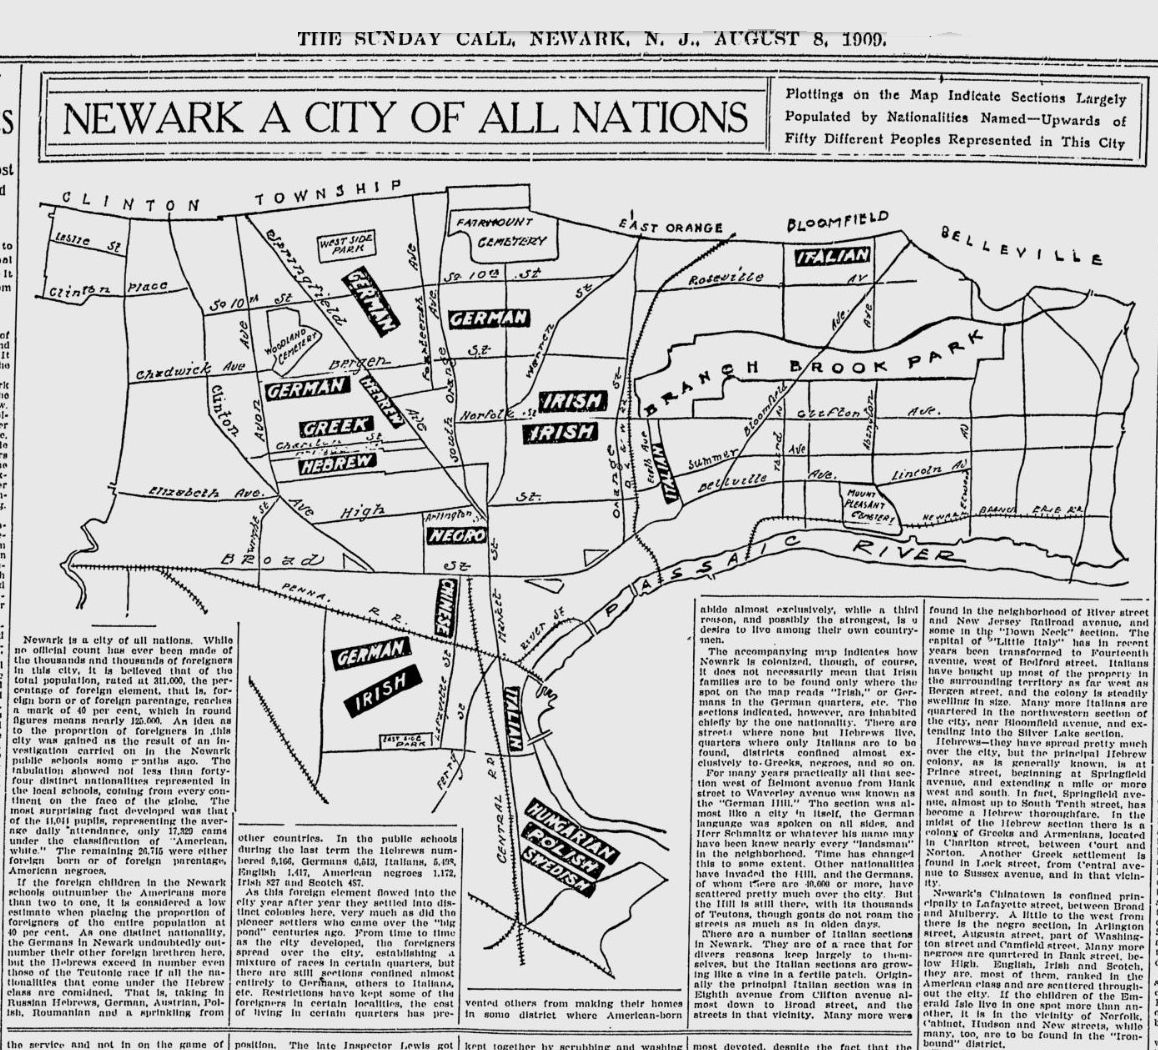 Newark a City of All Nations
August 8, 1909
